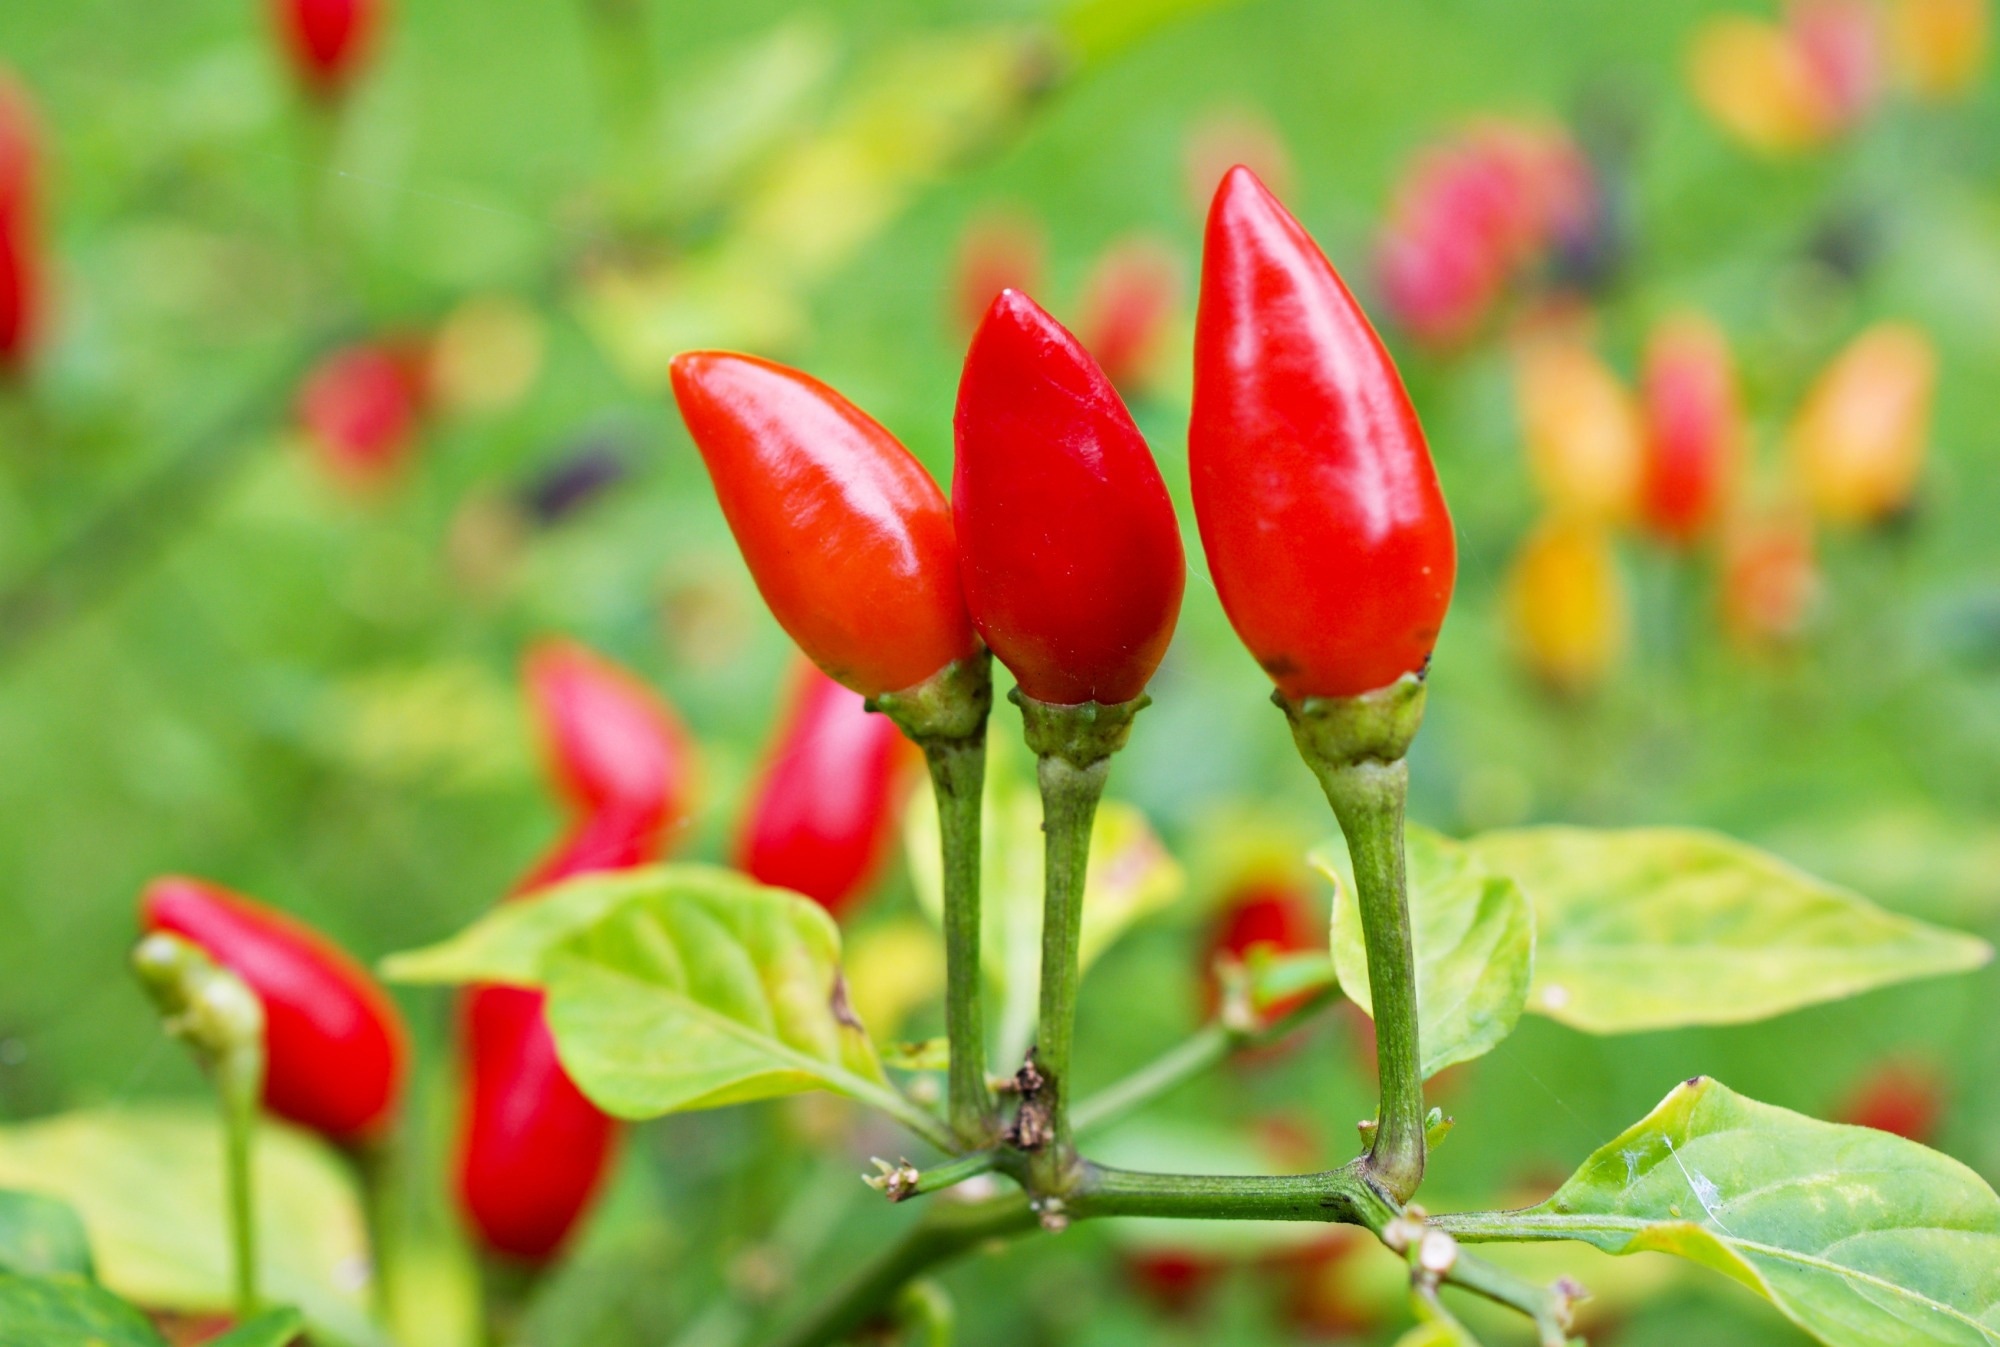 Mini Review: Piquin chili, a wild spice: natural variation in nutraceutical contents. Image Credit: Little daisy / Shutterstock